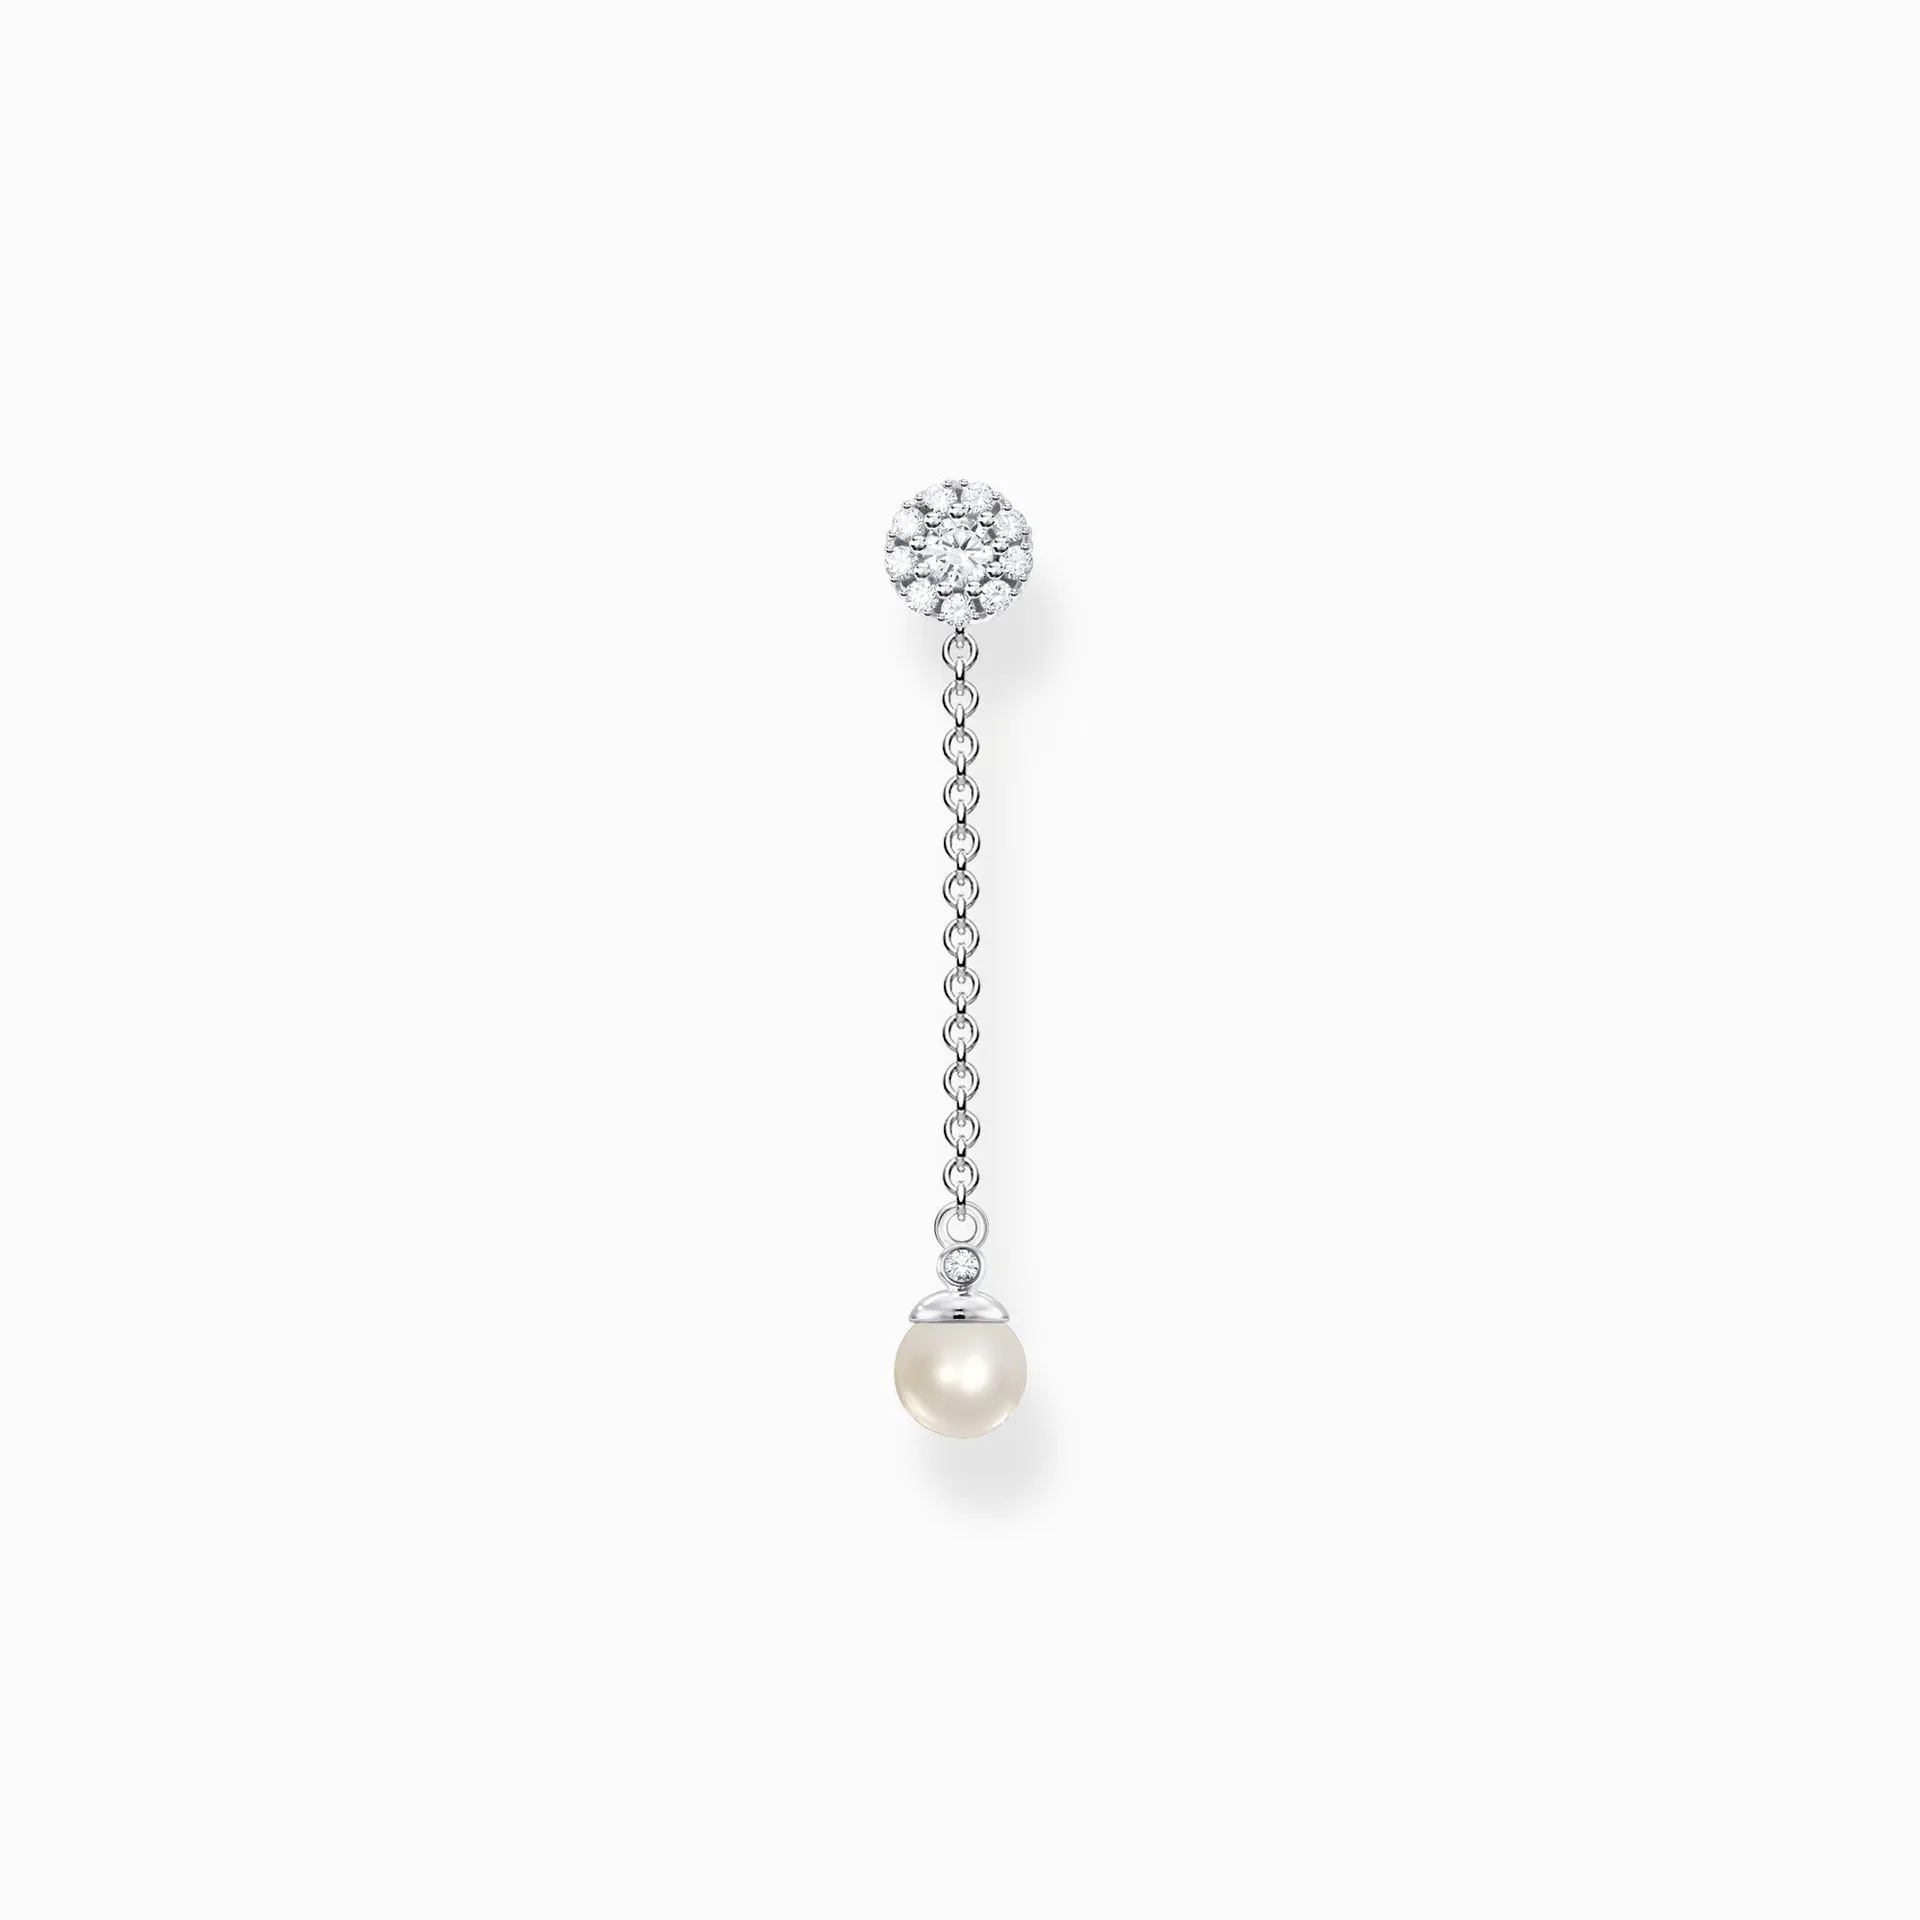 Single ear stud with pearls pendant long silver